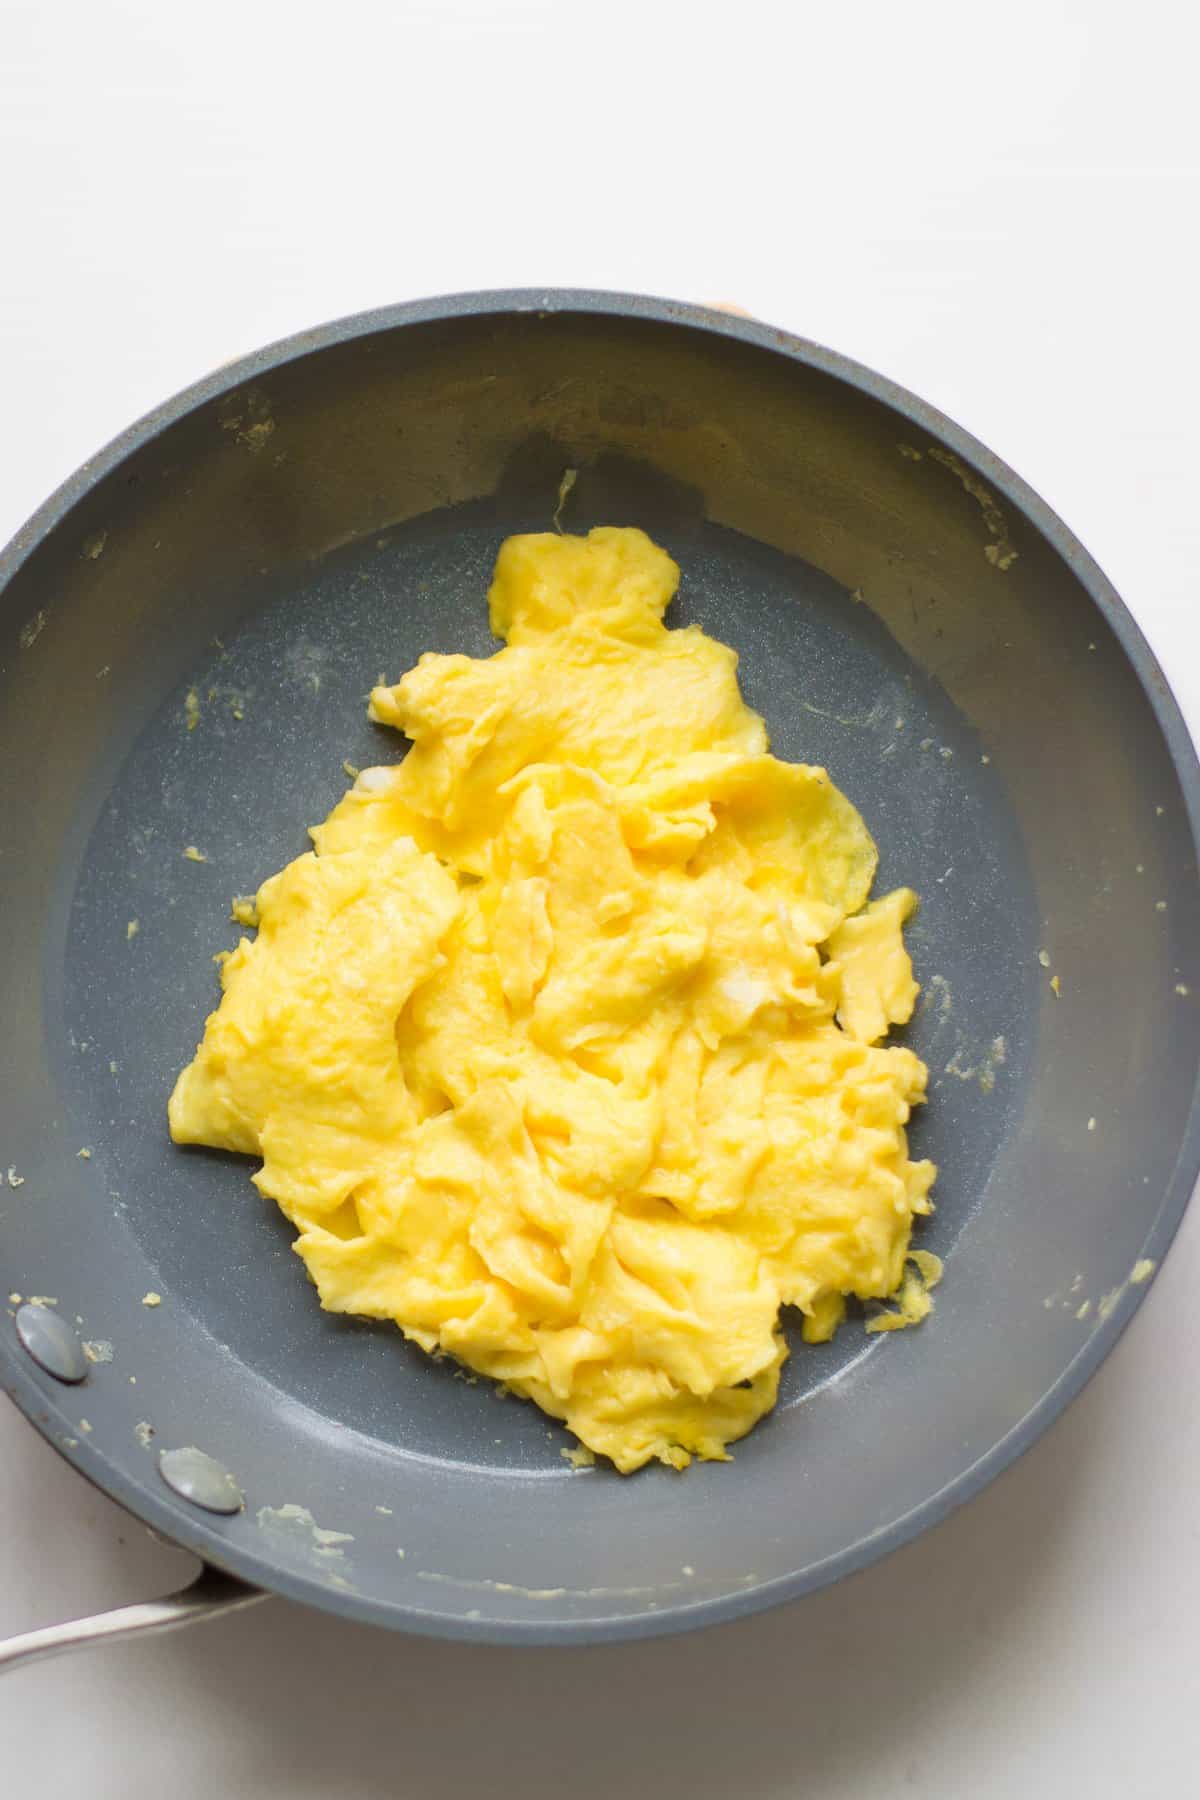 cooked scrambled eggs with large curds in a nonstick pan.